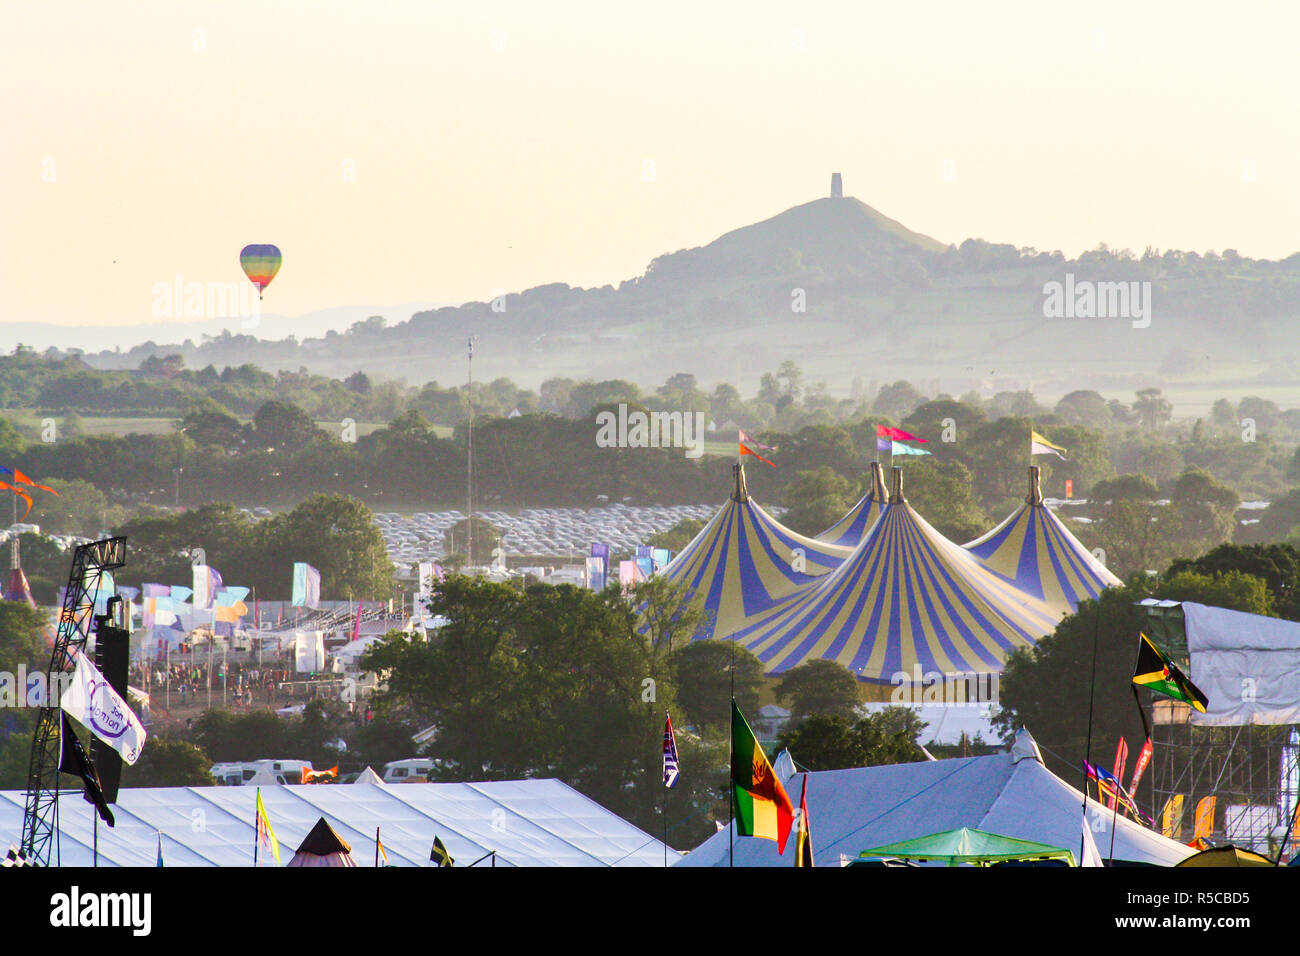 The pyramid stage at Glastonbury Festival with a hot air balloon rising in the distance Stock Photo